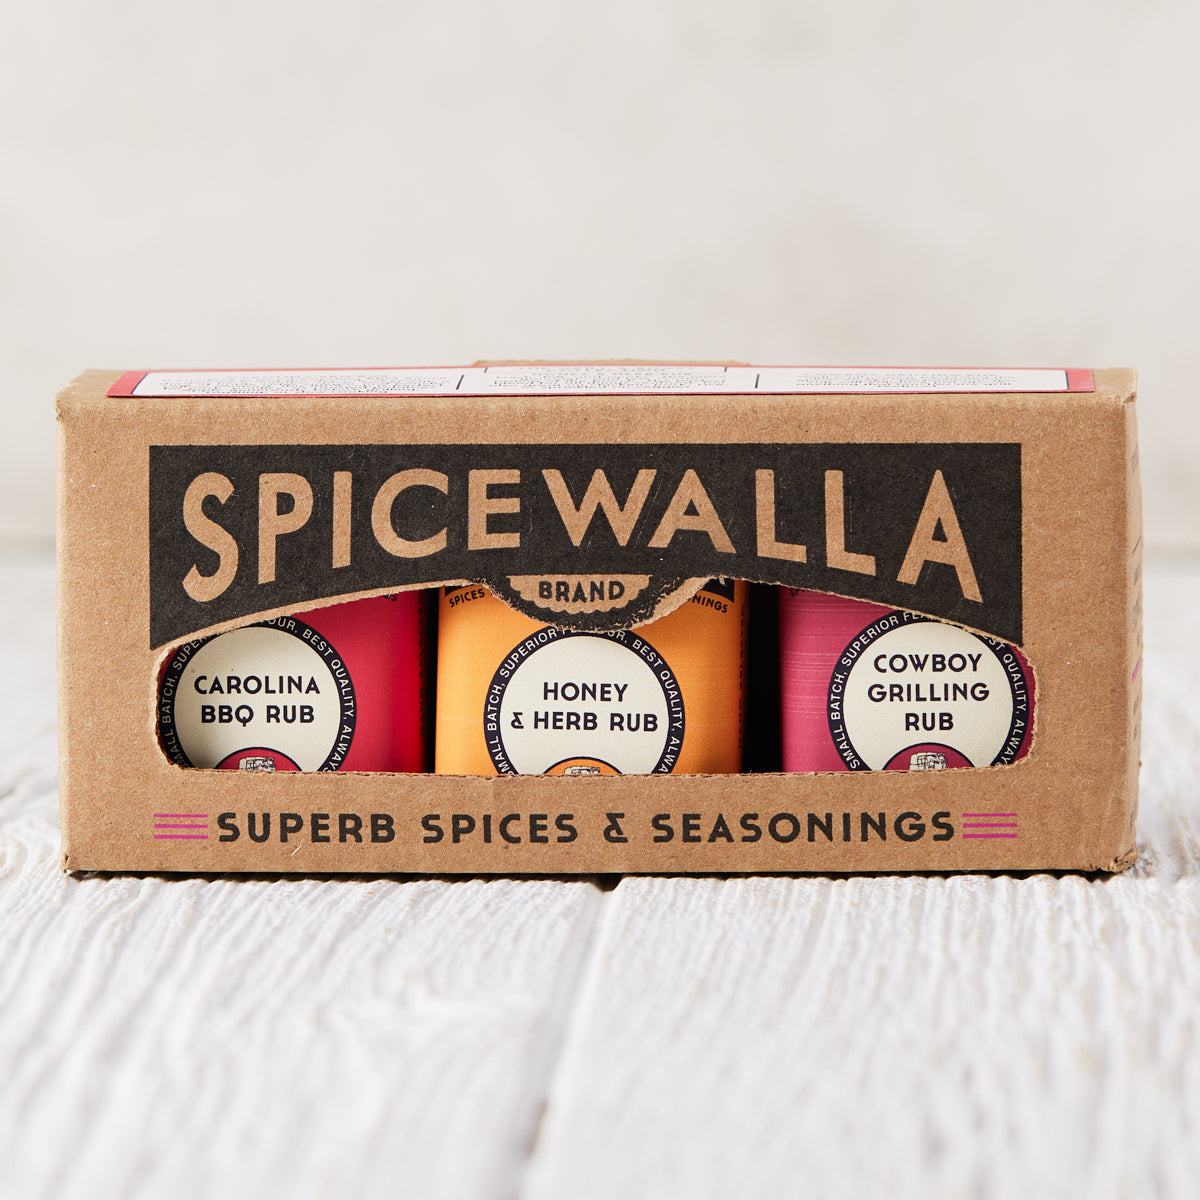 Grill & Roast Spice Collection